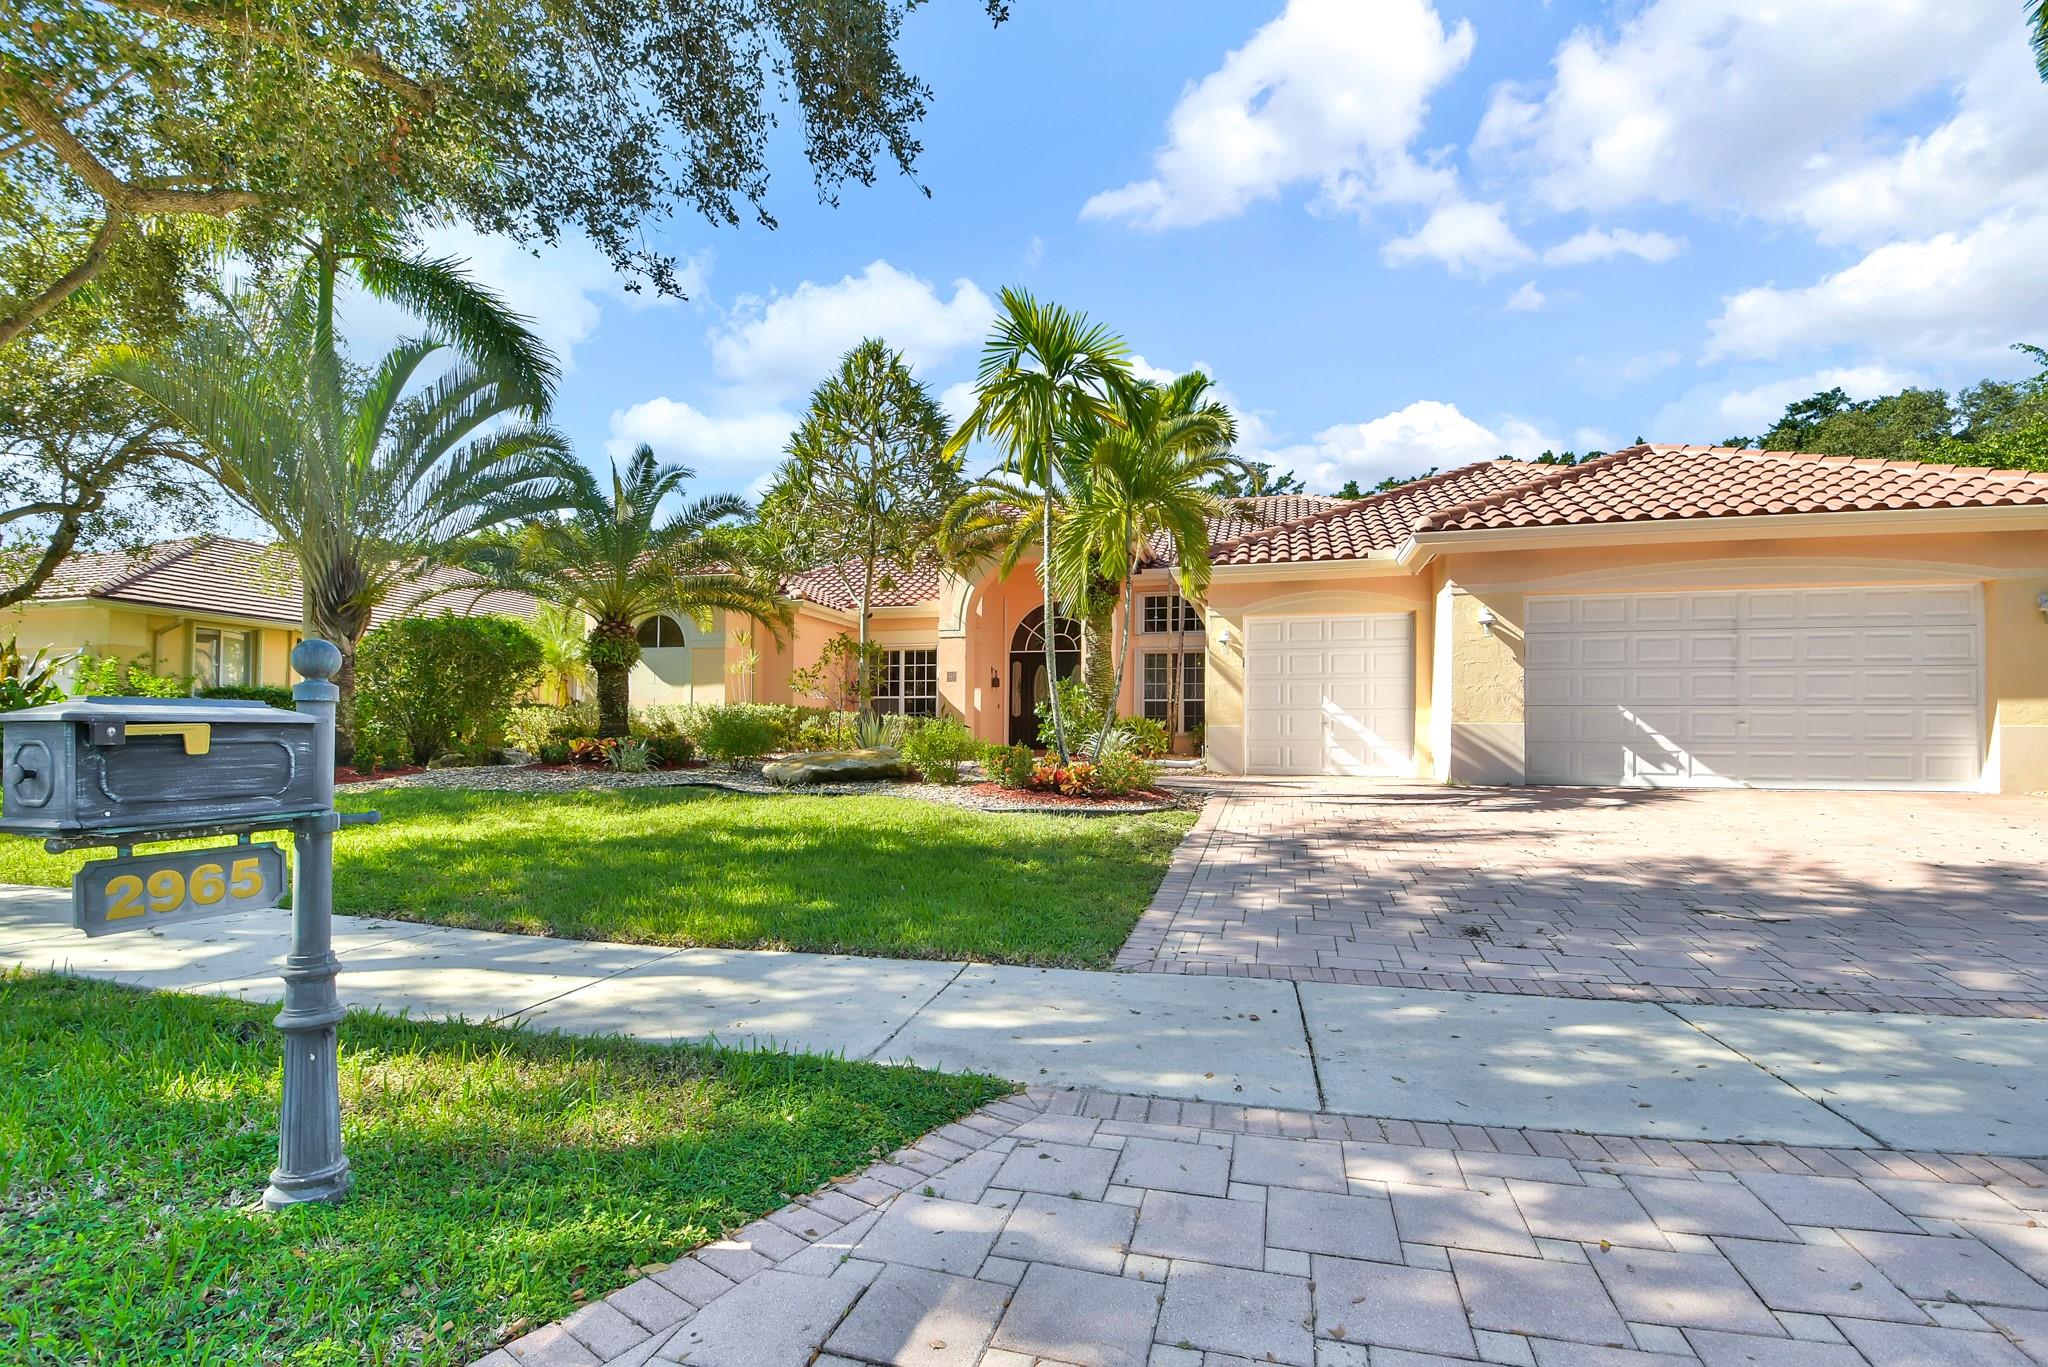 House for Sale in Weston, FL